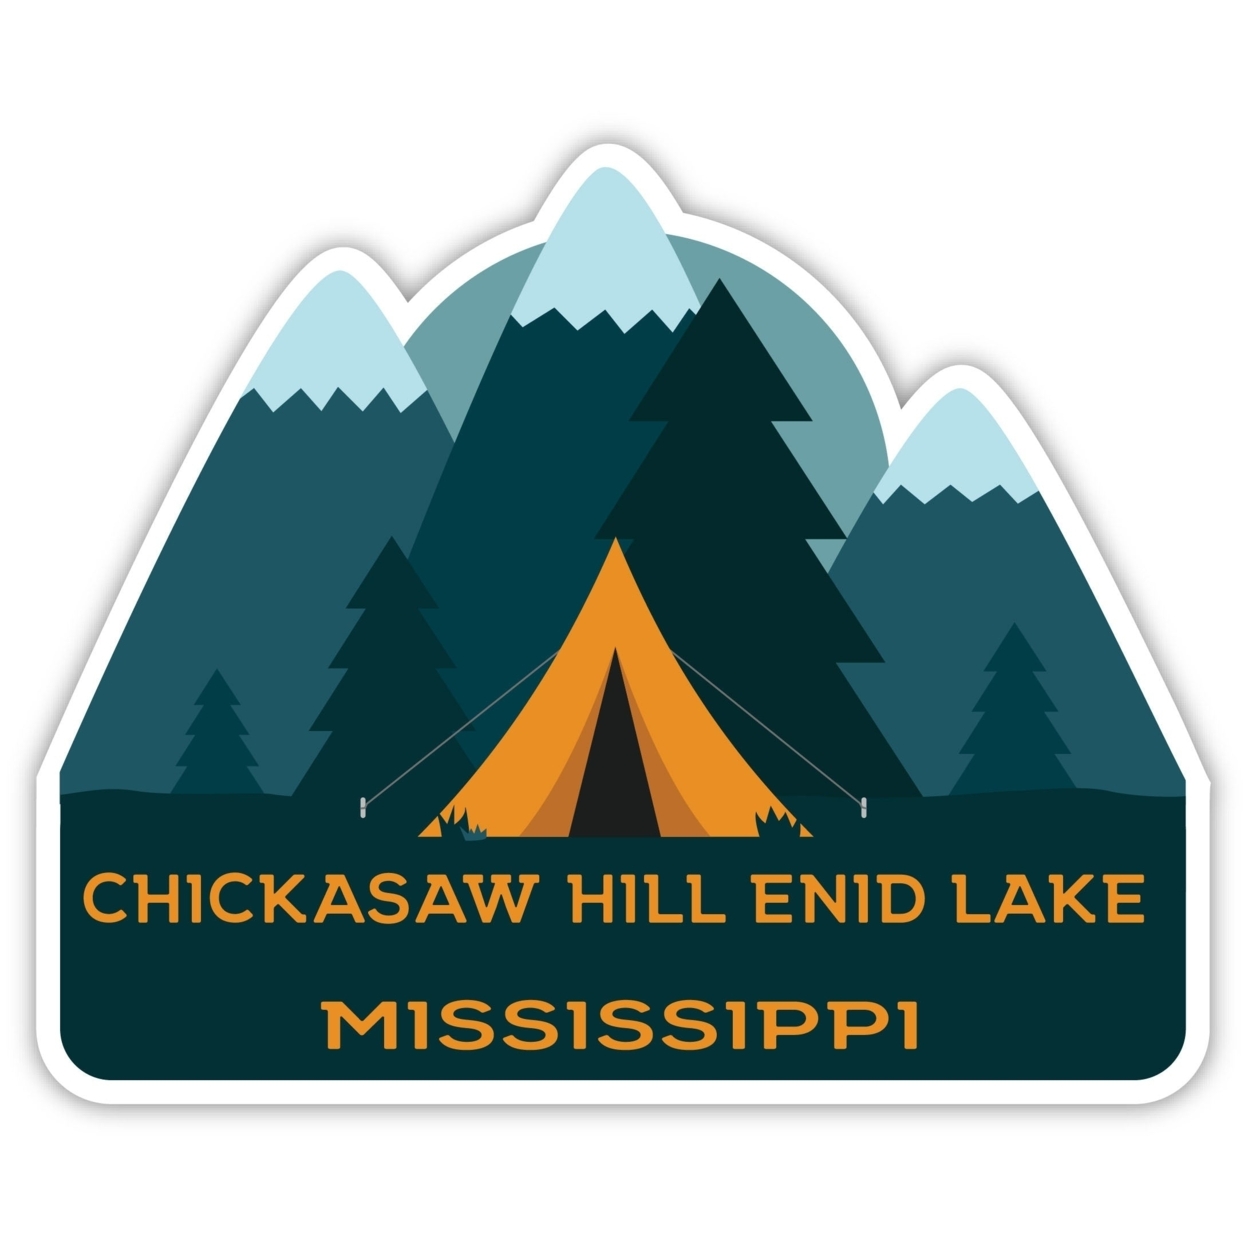 Chickasaw Hill Enid Lake Mississippi Souvenir Decorative Stickers (Choose Theme And Size) - 4-Pack, 4-Inch, Tent